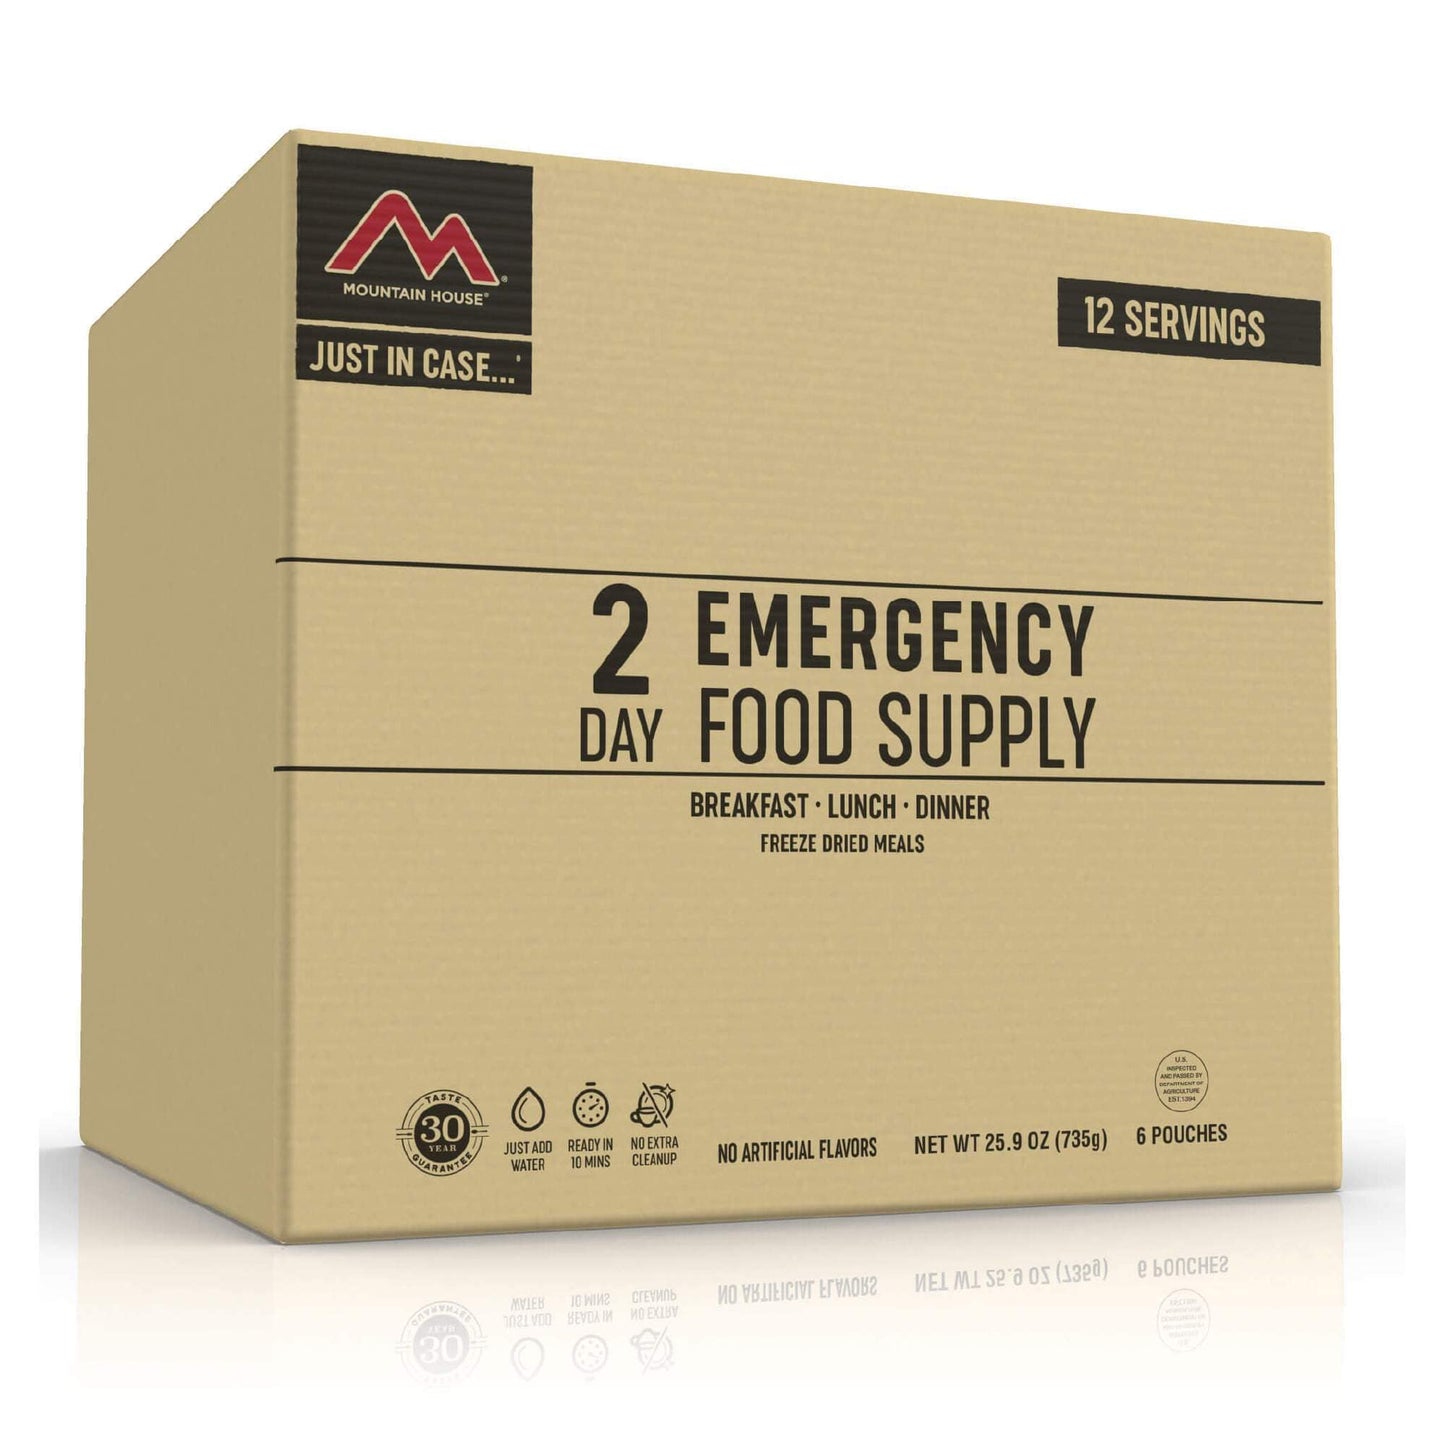 Just in Case...® 2 Day Emergency Food Supply